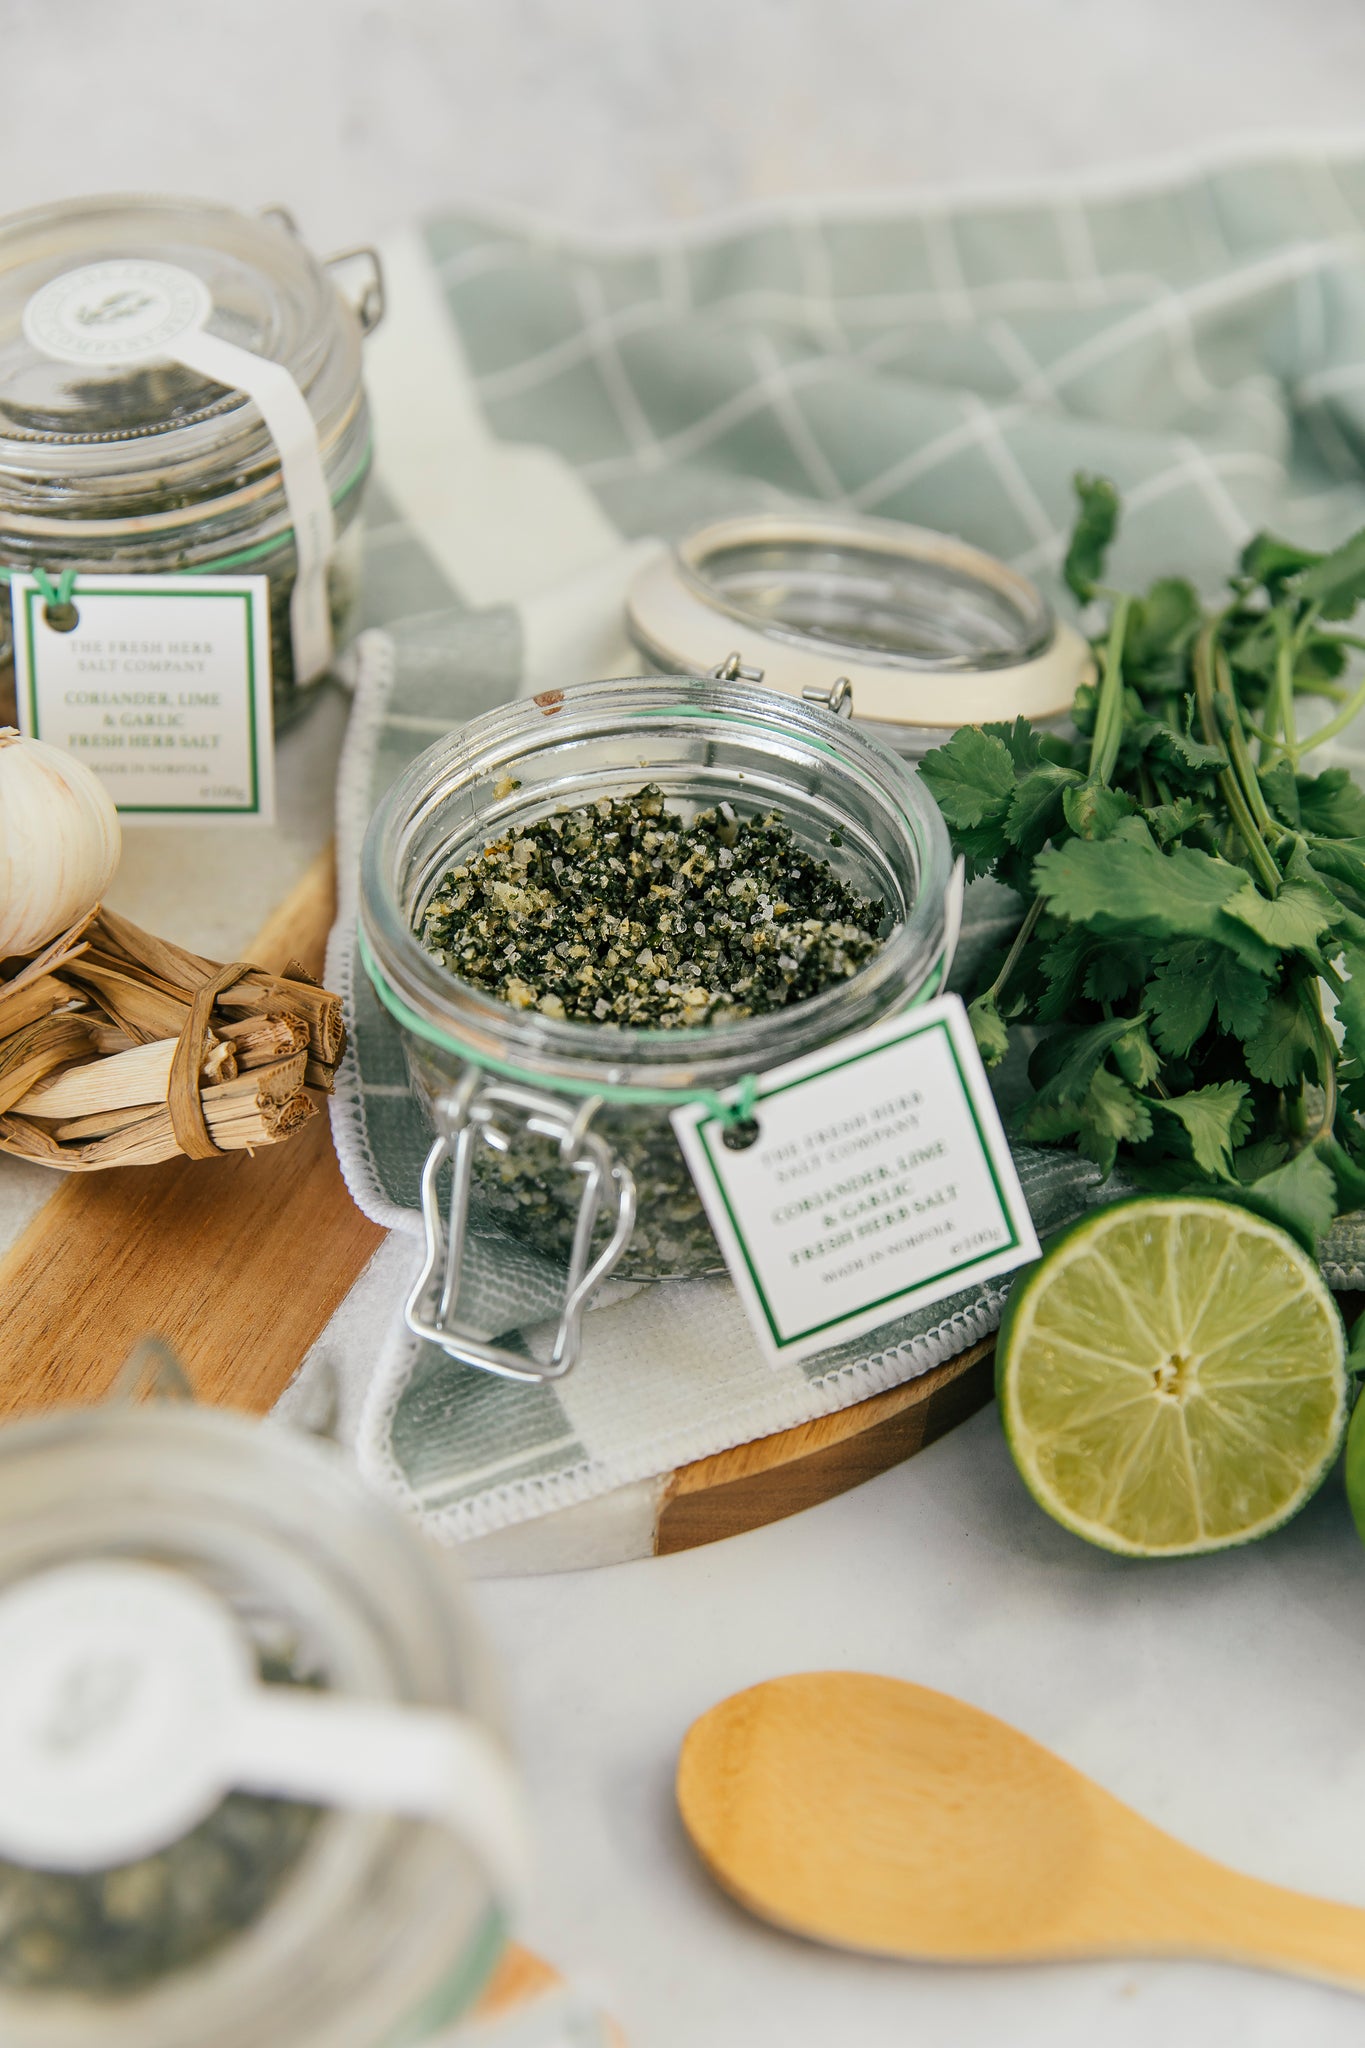 Experience the aromatic appeal of Coriander, Garlic, and Lime Fresh Herb Seasoning seamlessly mixed into pure white coarse and fine sea salt, elegantly stored in a glass Kilner jar. The jar's reusability is emphasized, providing an eco-friendly option for replenishment with our refill pouches